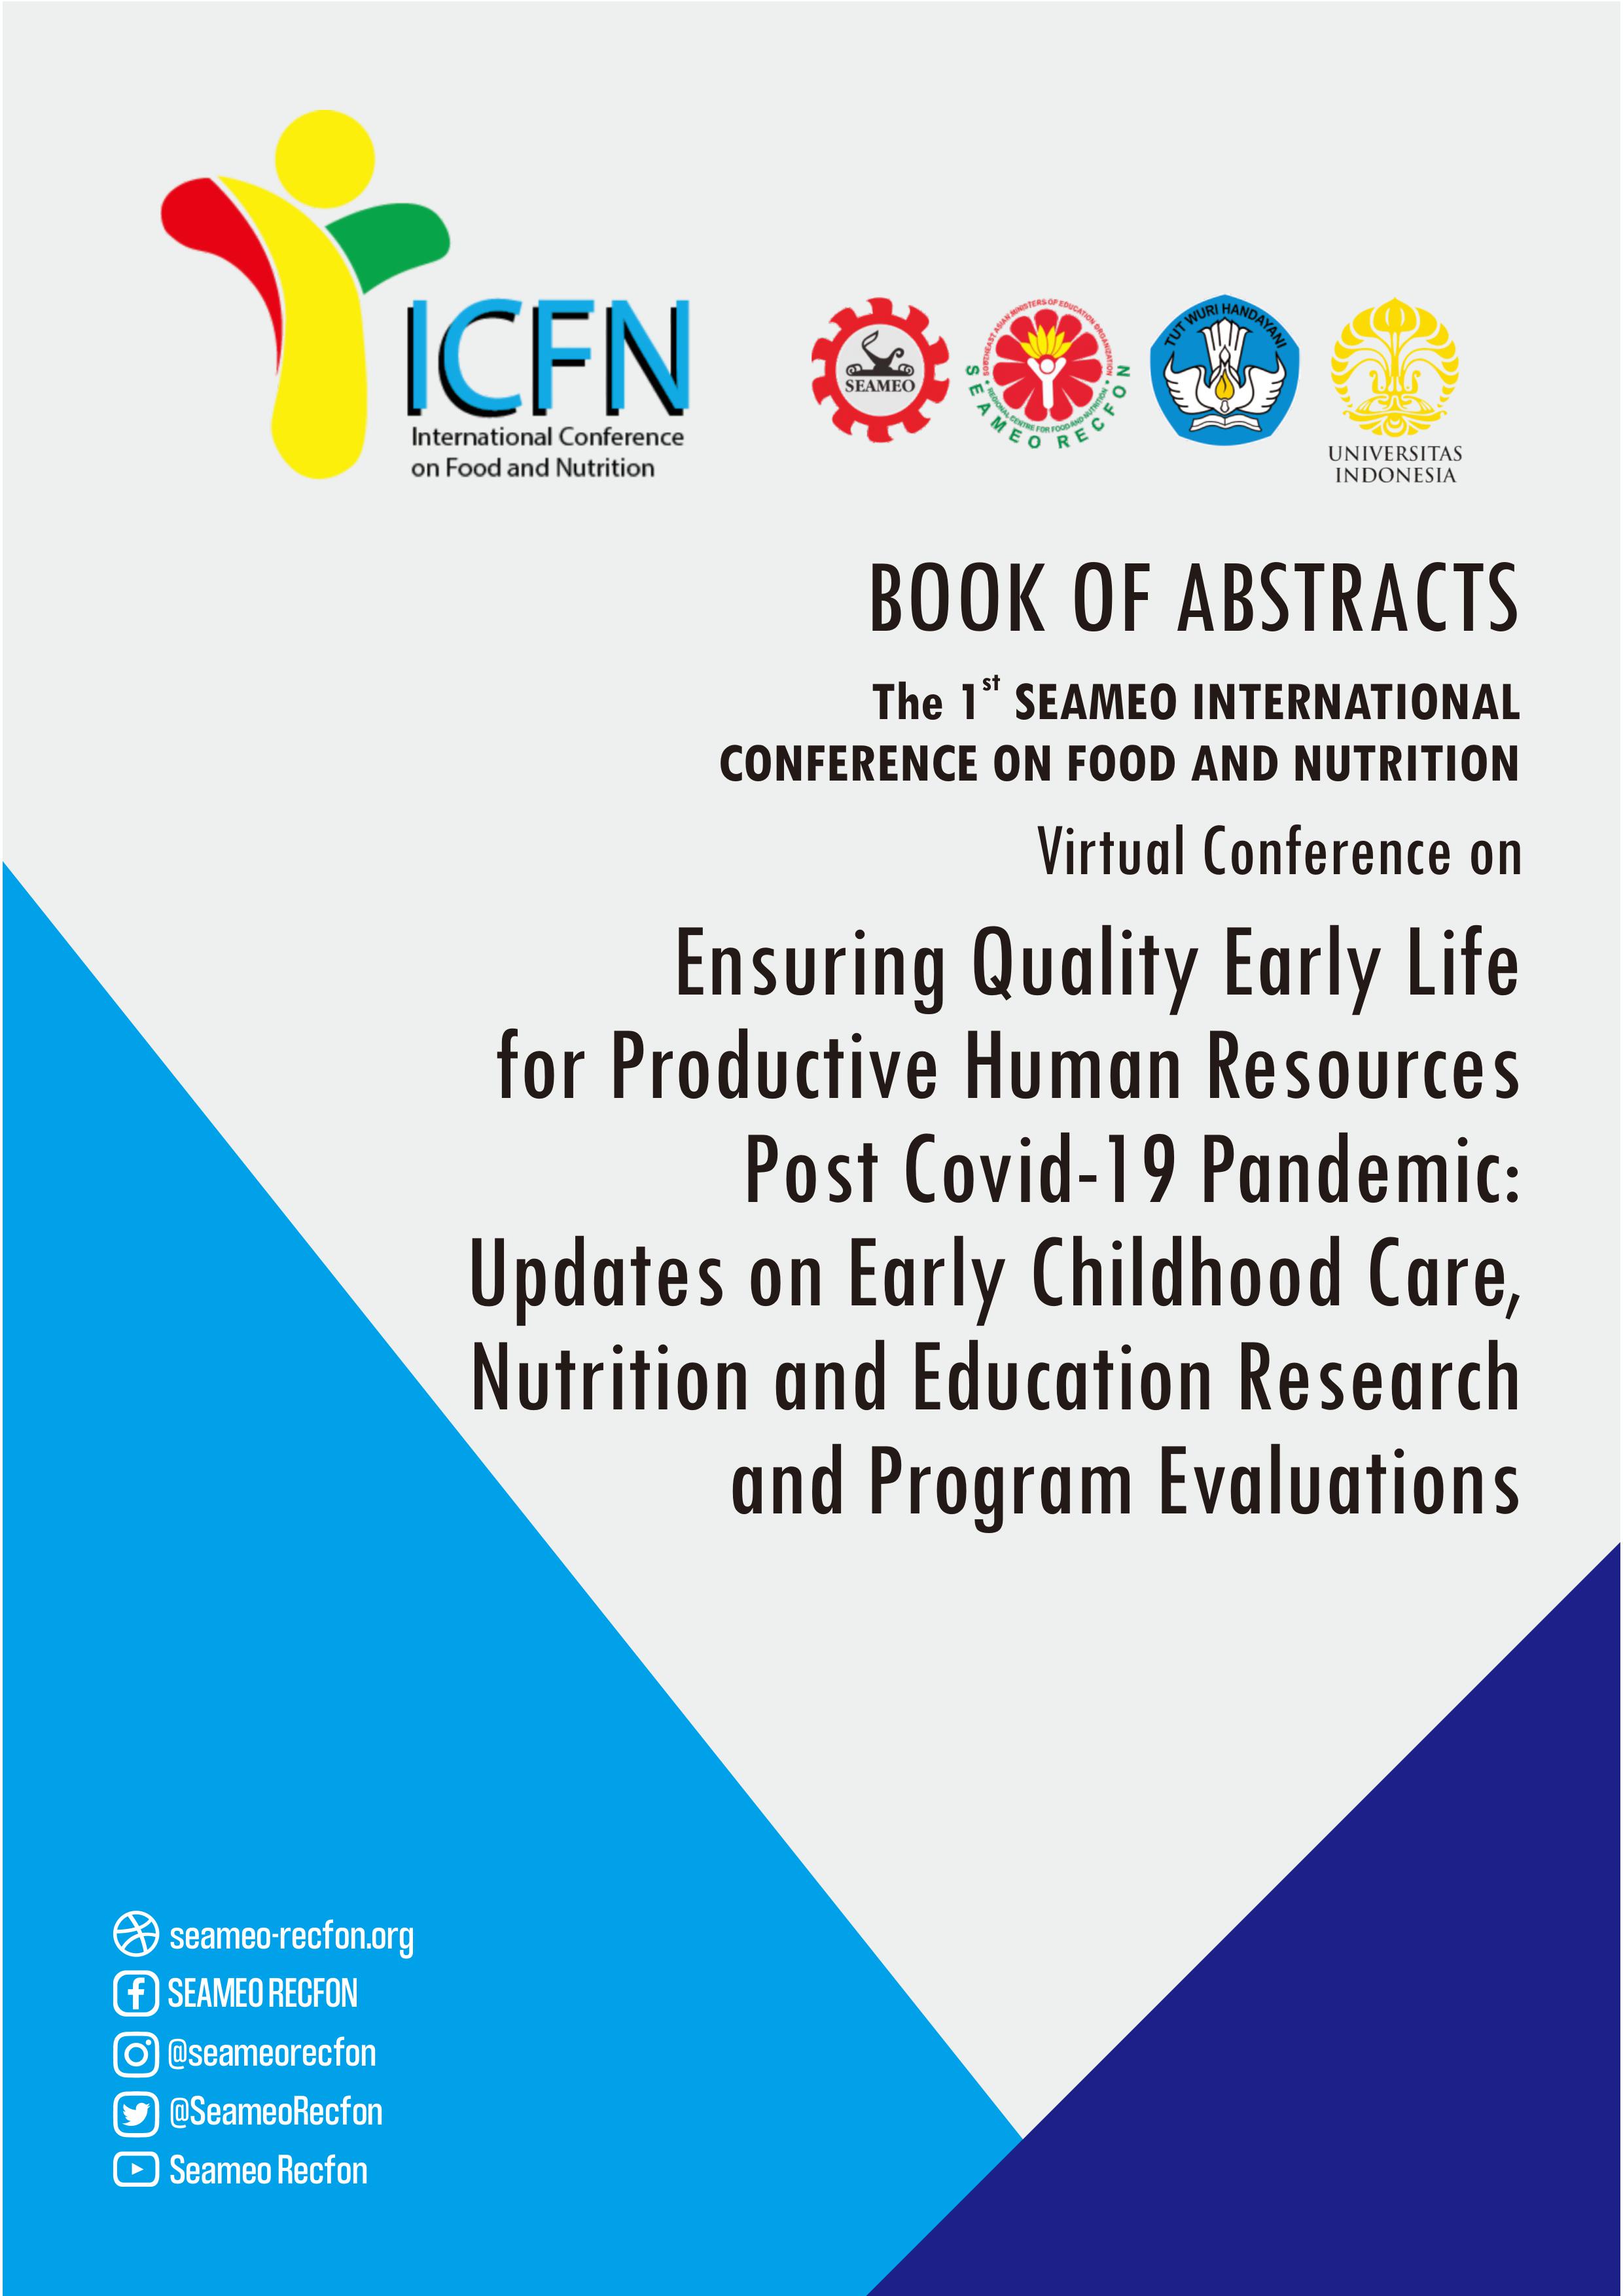 Book of Abstract the 1st SEAMEO International Conference on Food and Nutrition [sumber elektronis] : ensuring quality early life for productive human resources post Covid-19 pandemic : updates on early childhood care, nutrition and education research and program evaluations : Jakarta, 9 - 11 September 2020